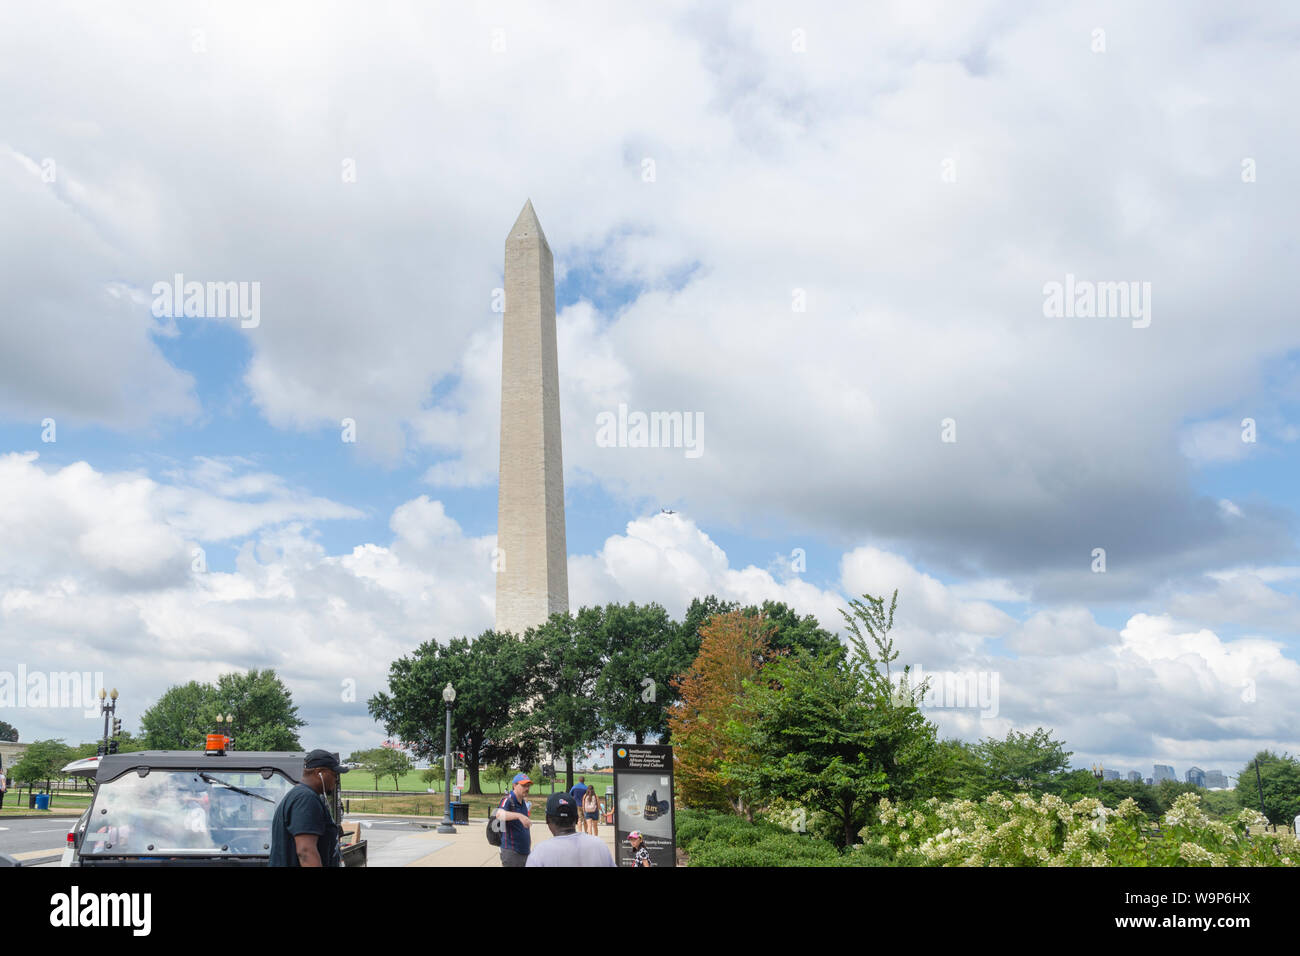 Humid summer skies over the Washington Monument on the National Mall in Washington, DC. Stock Photo